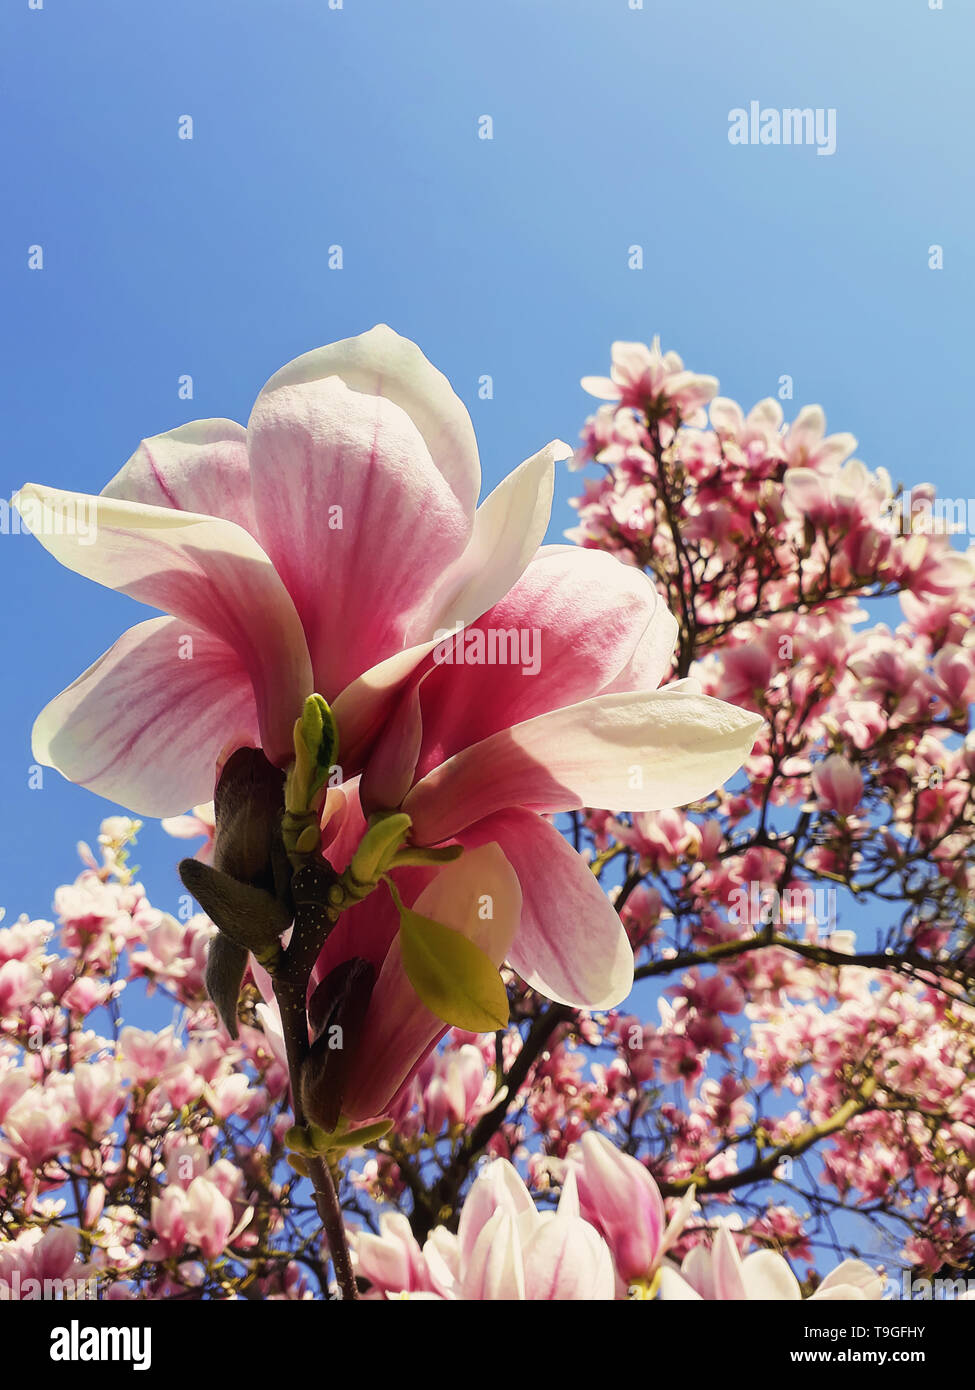 Wild pink magnolia tree buds blooming, floral pattern over blue sky. Spring flower cluster blossoms close up on the branches in the park. Beautiful na Stock Photo